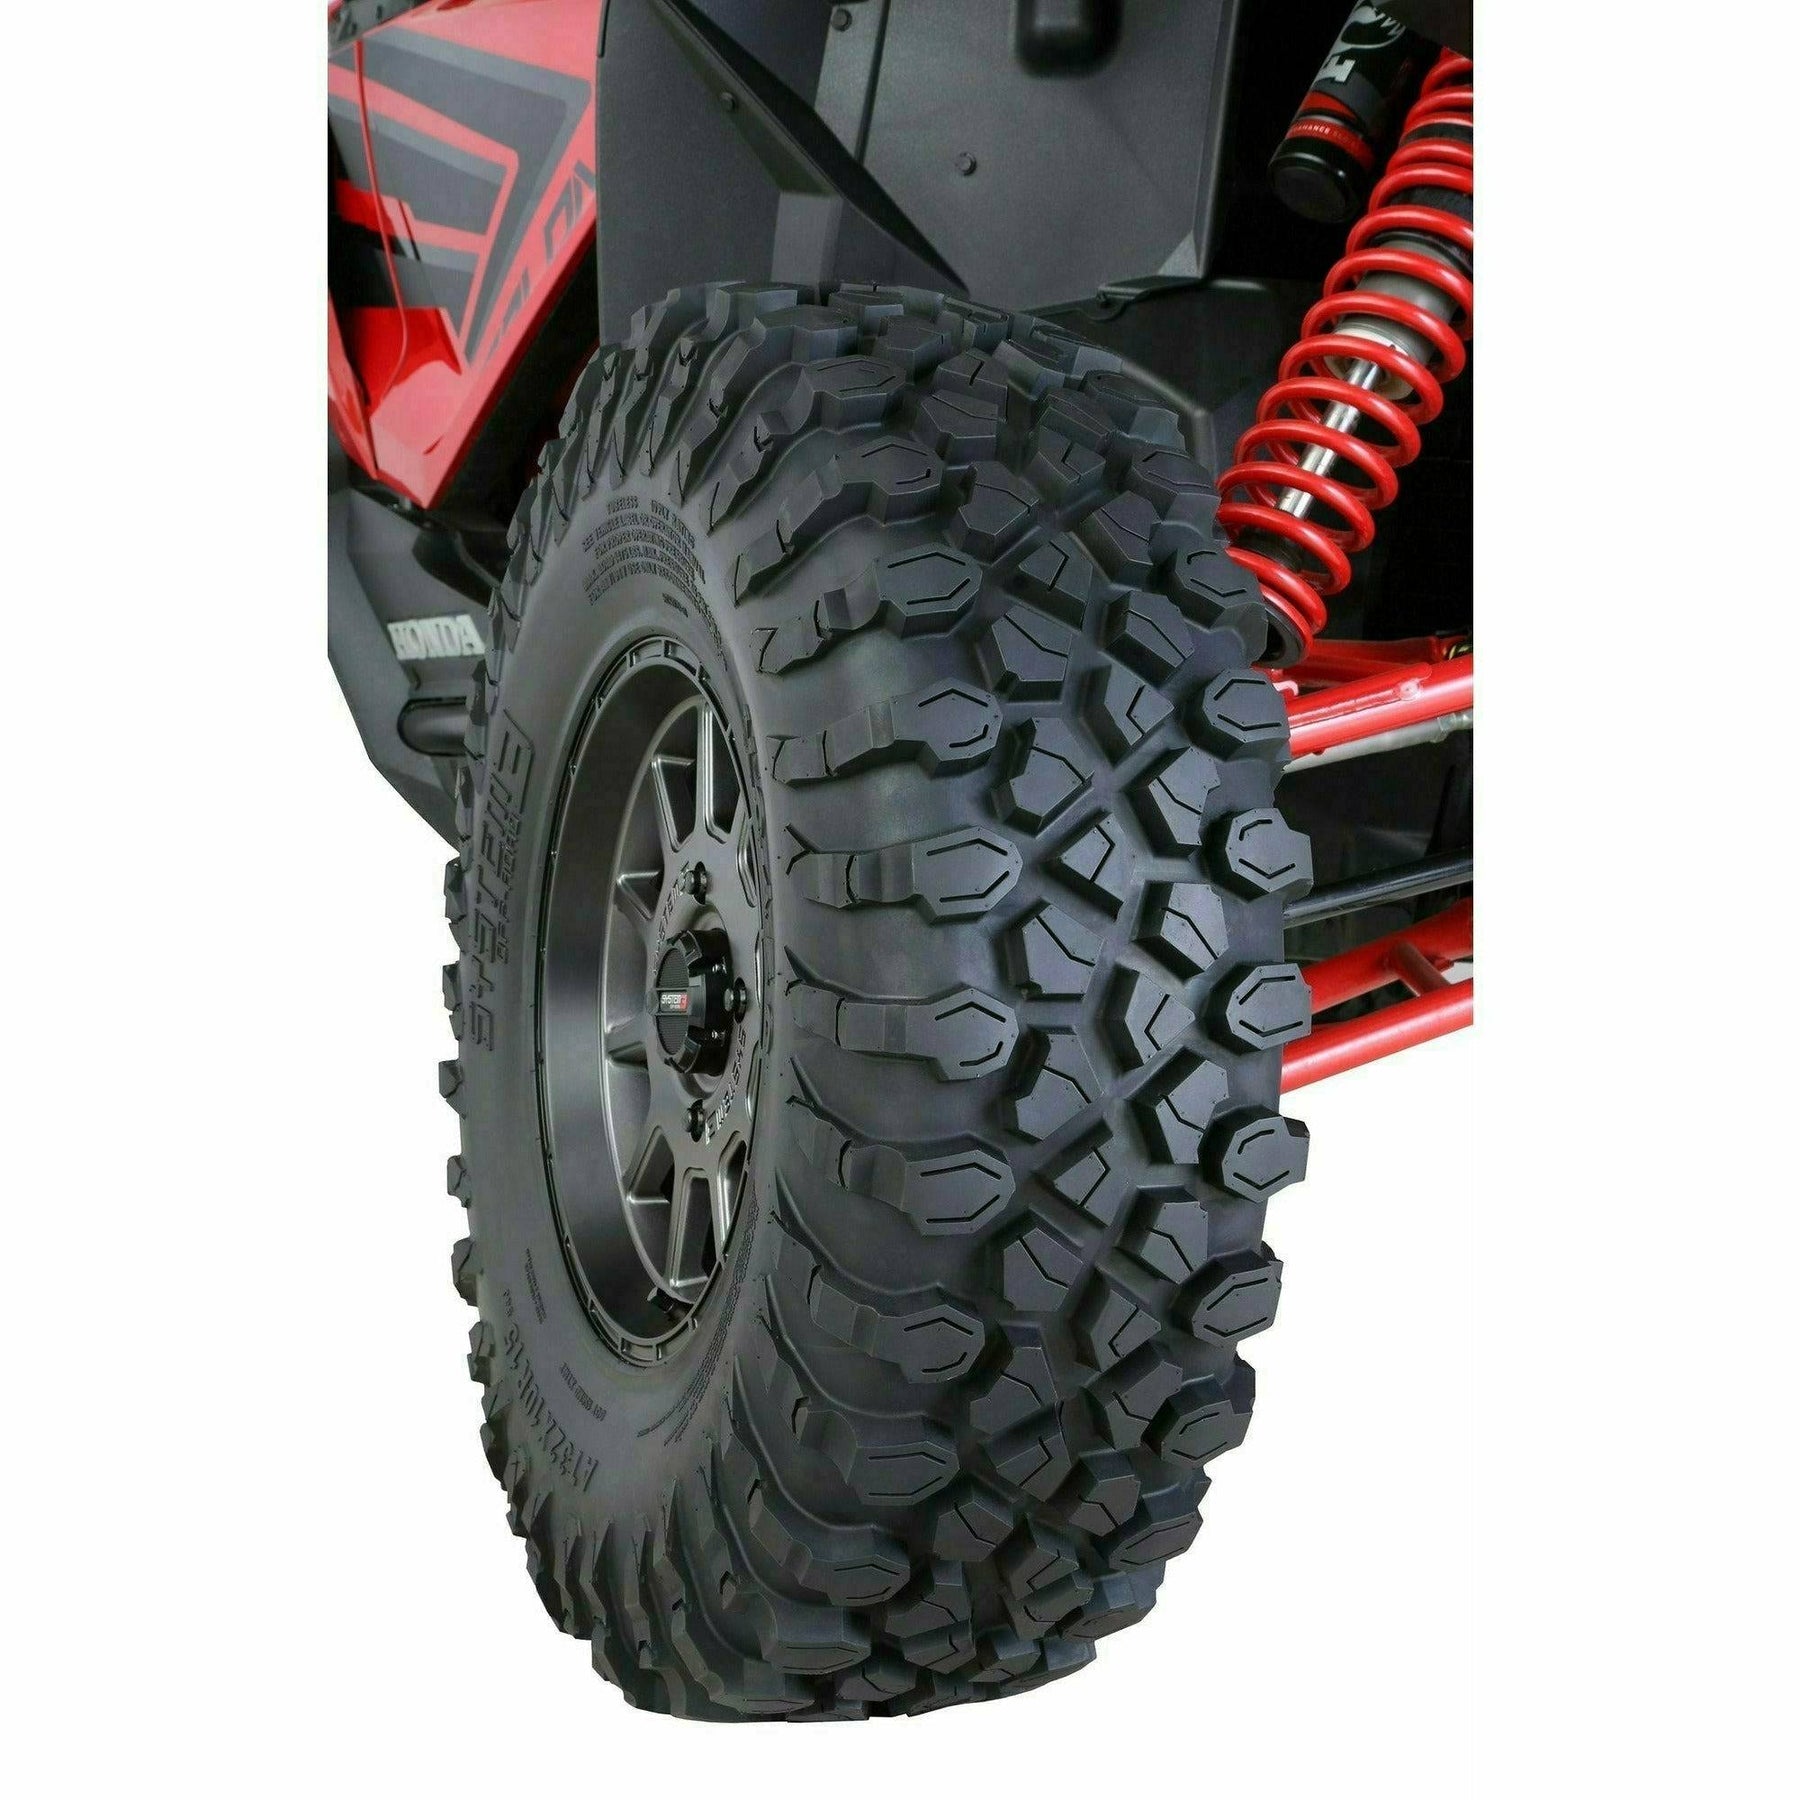 System 3 Offroad XC450 Tire